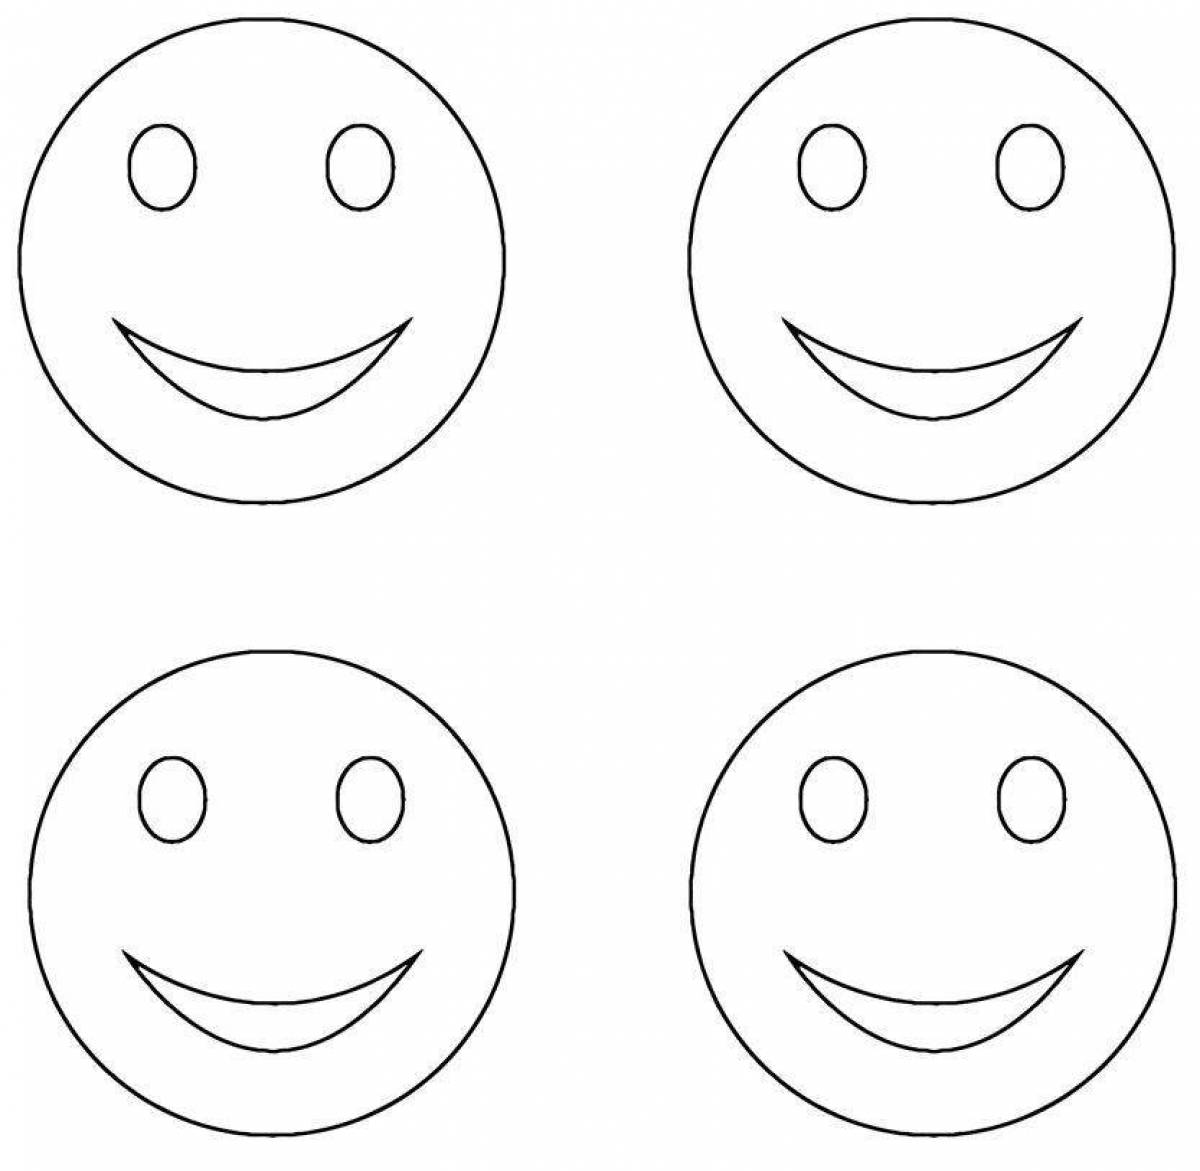 Animated smiley face coloring book